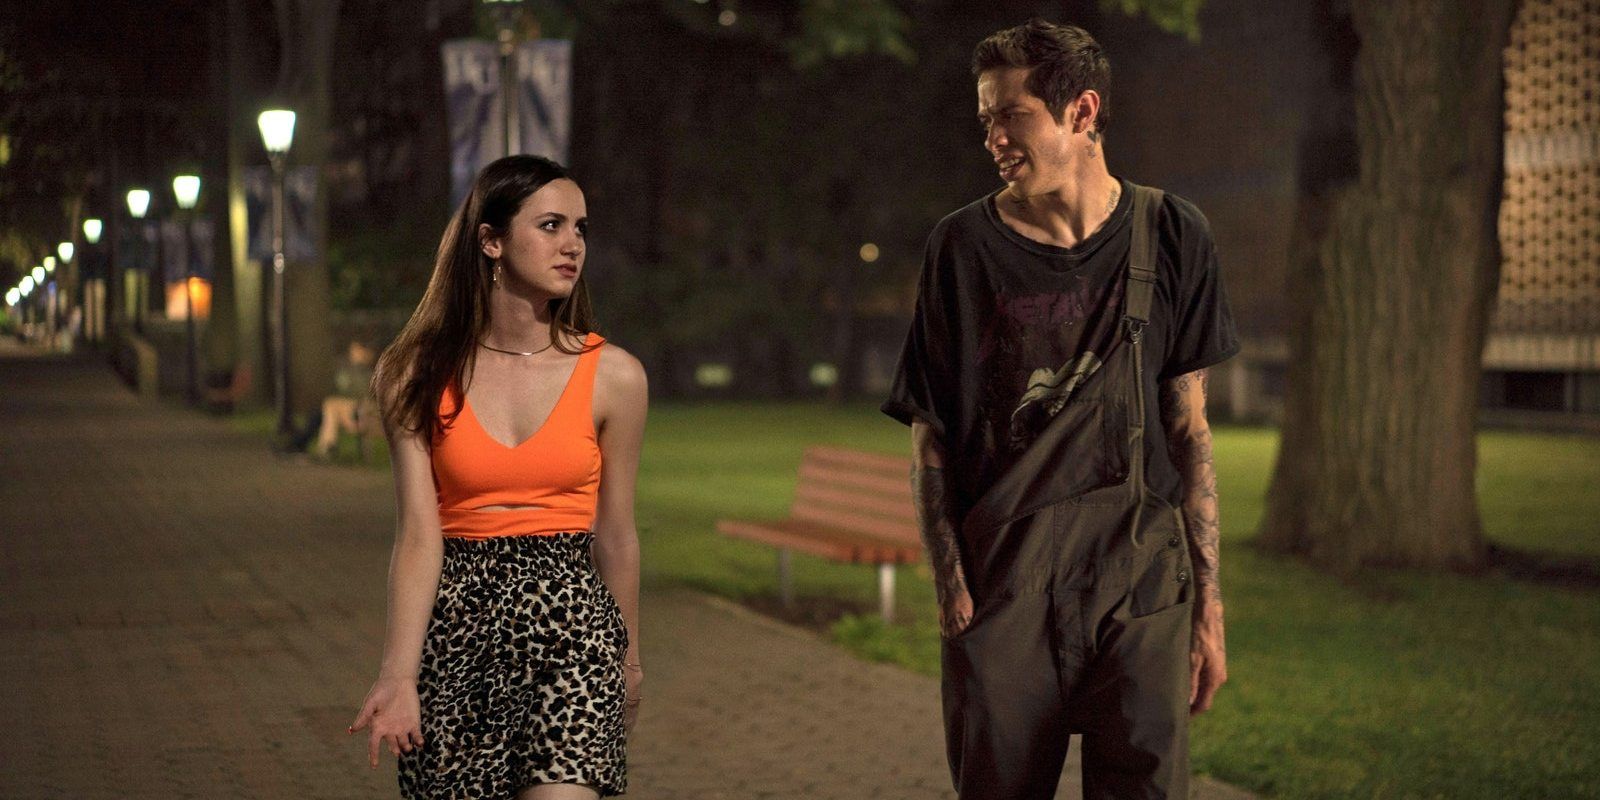 Maude Apatow and Pete Davidson in The King of Staten Island